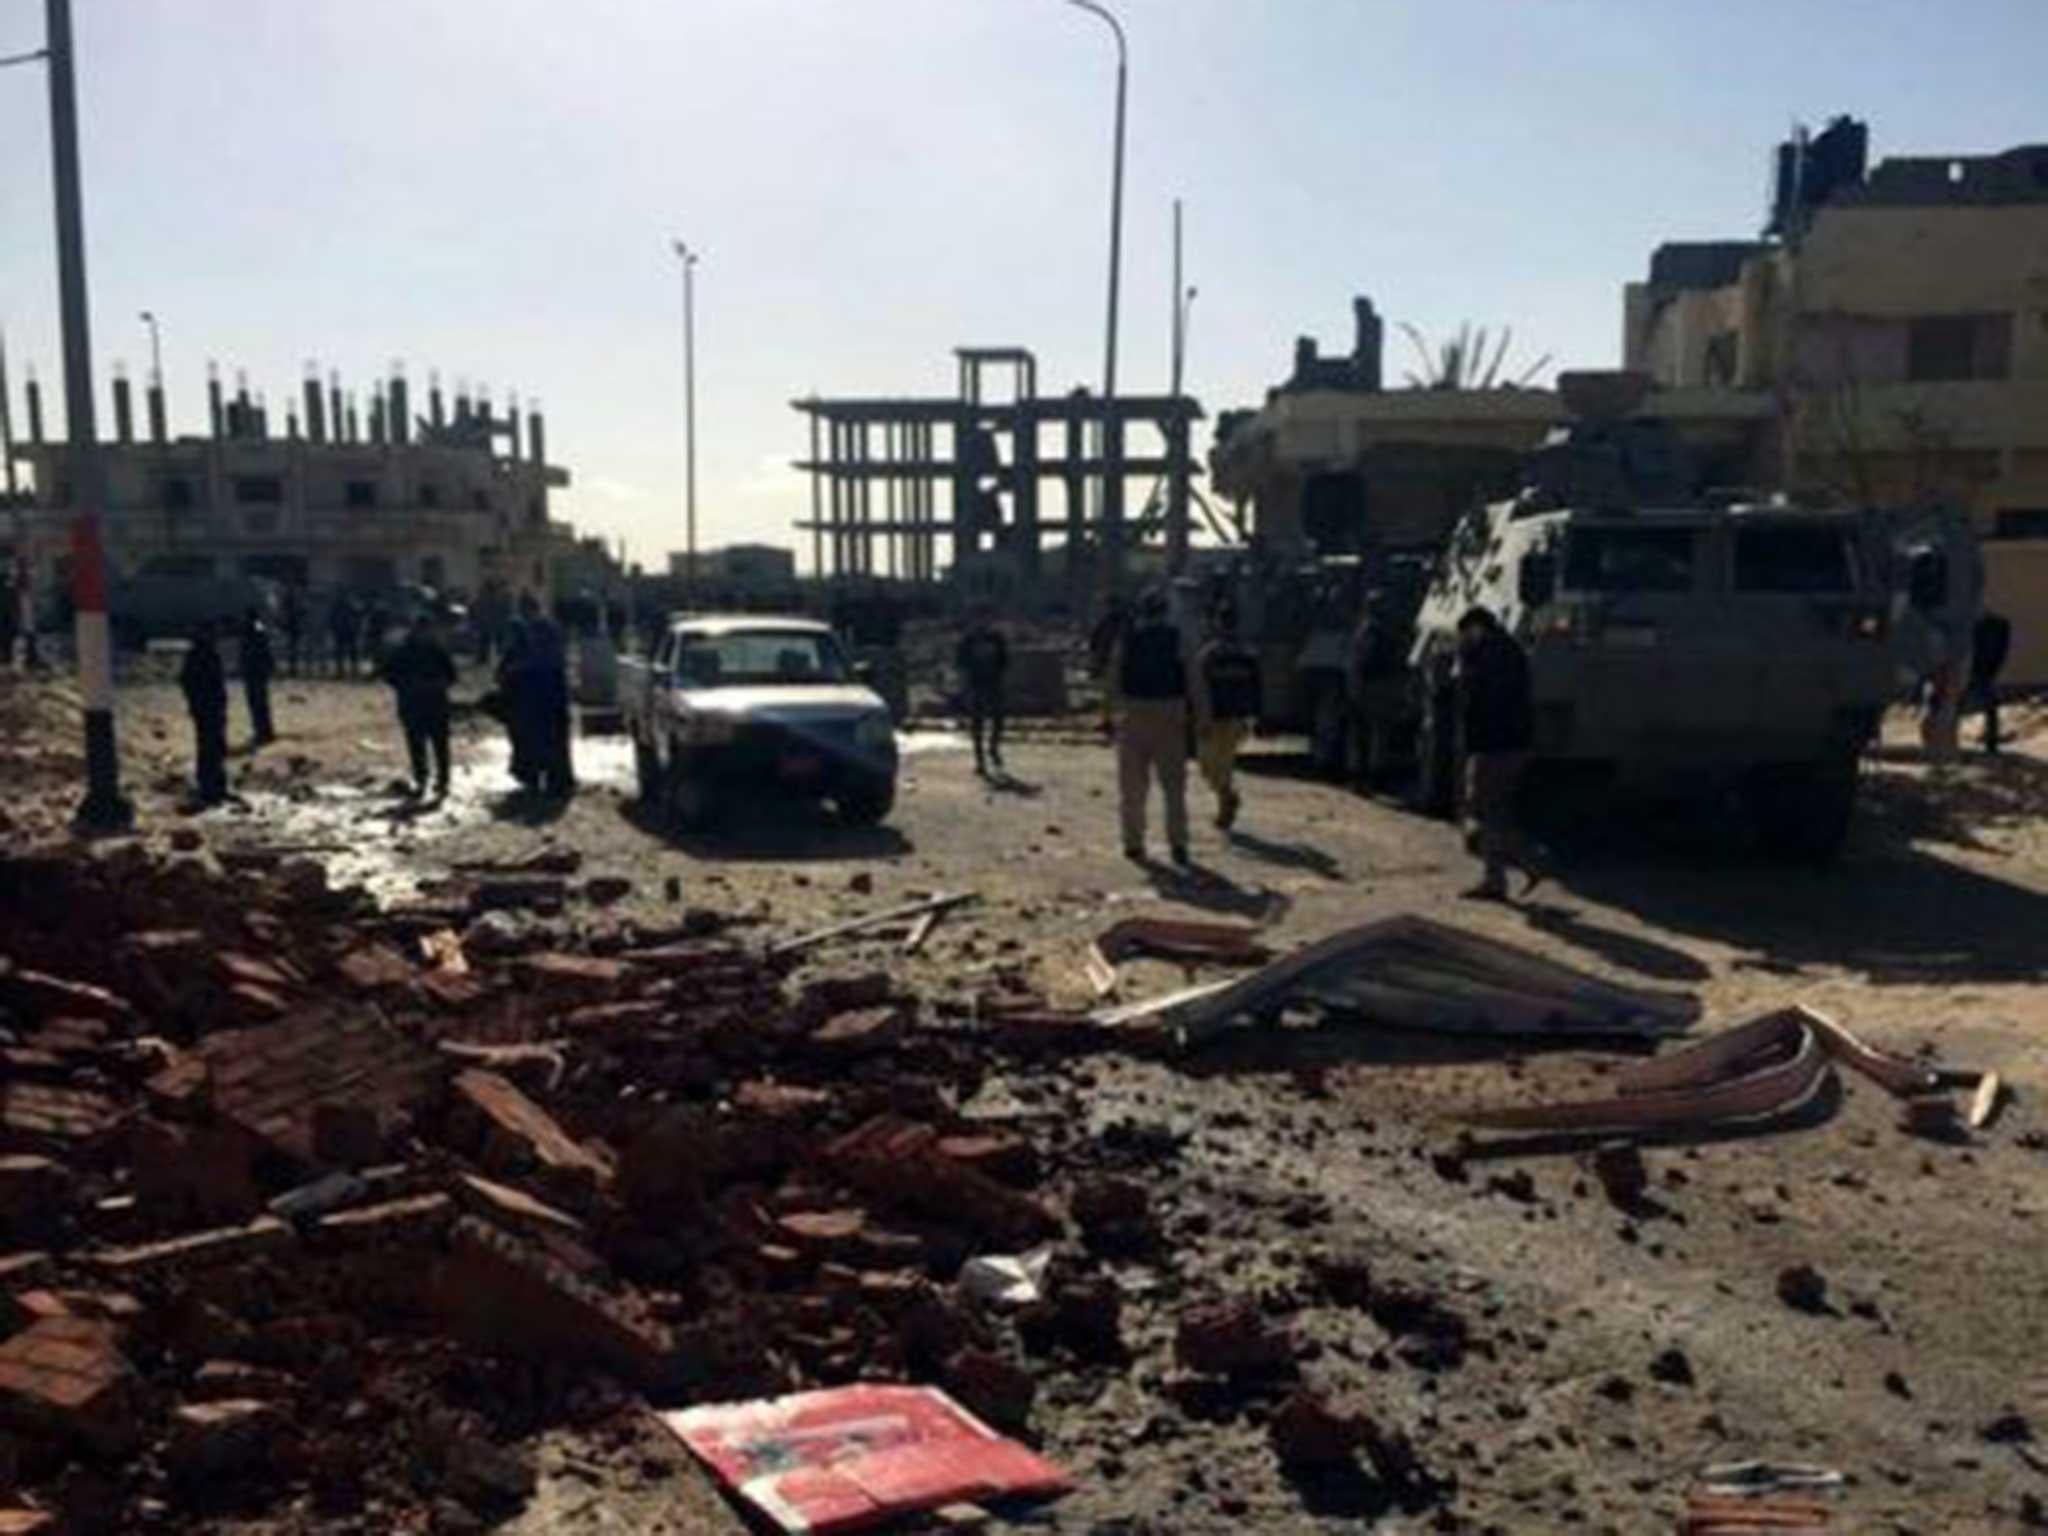 No group has yet claimed responsibility for the attack in el-Arish